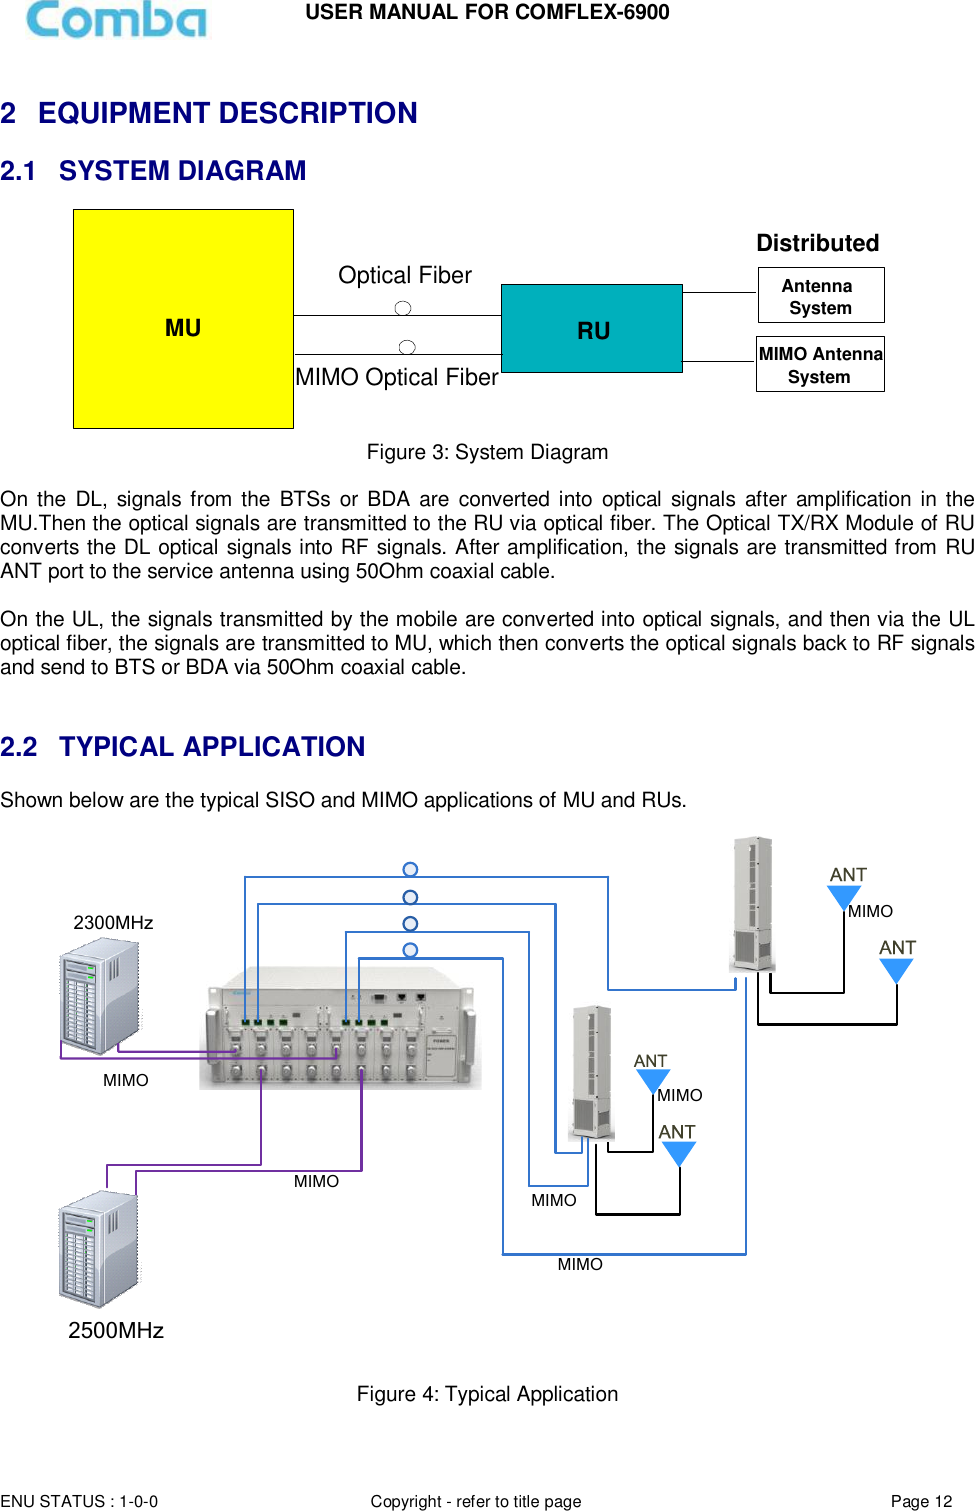 Page 12 of Comba Telecom COMFLEX-6900 ComFlex Series Distributed Antenna System User Manual 